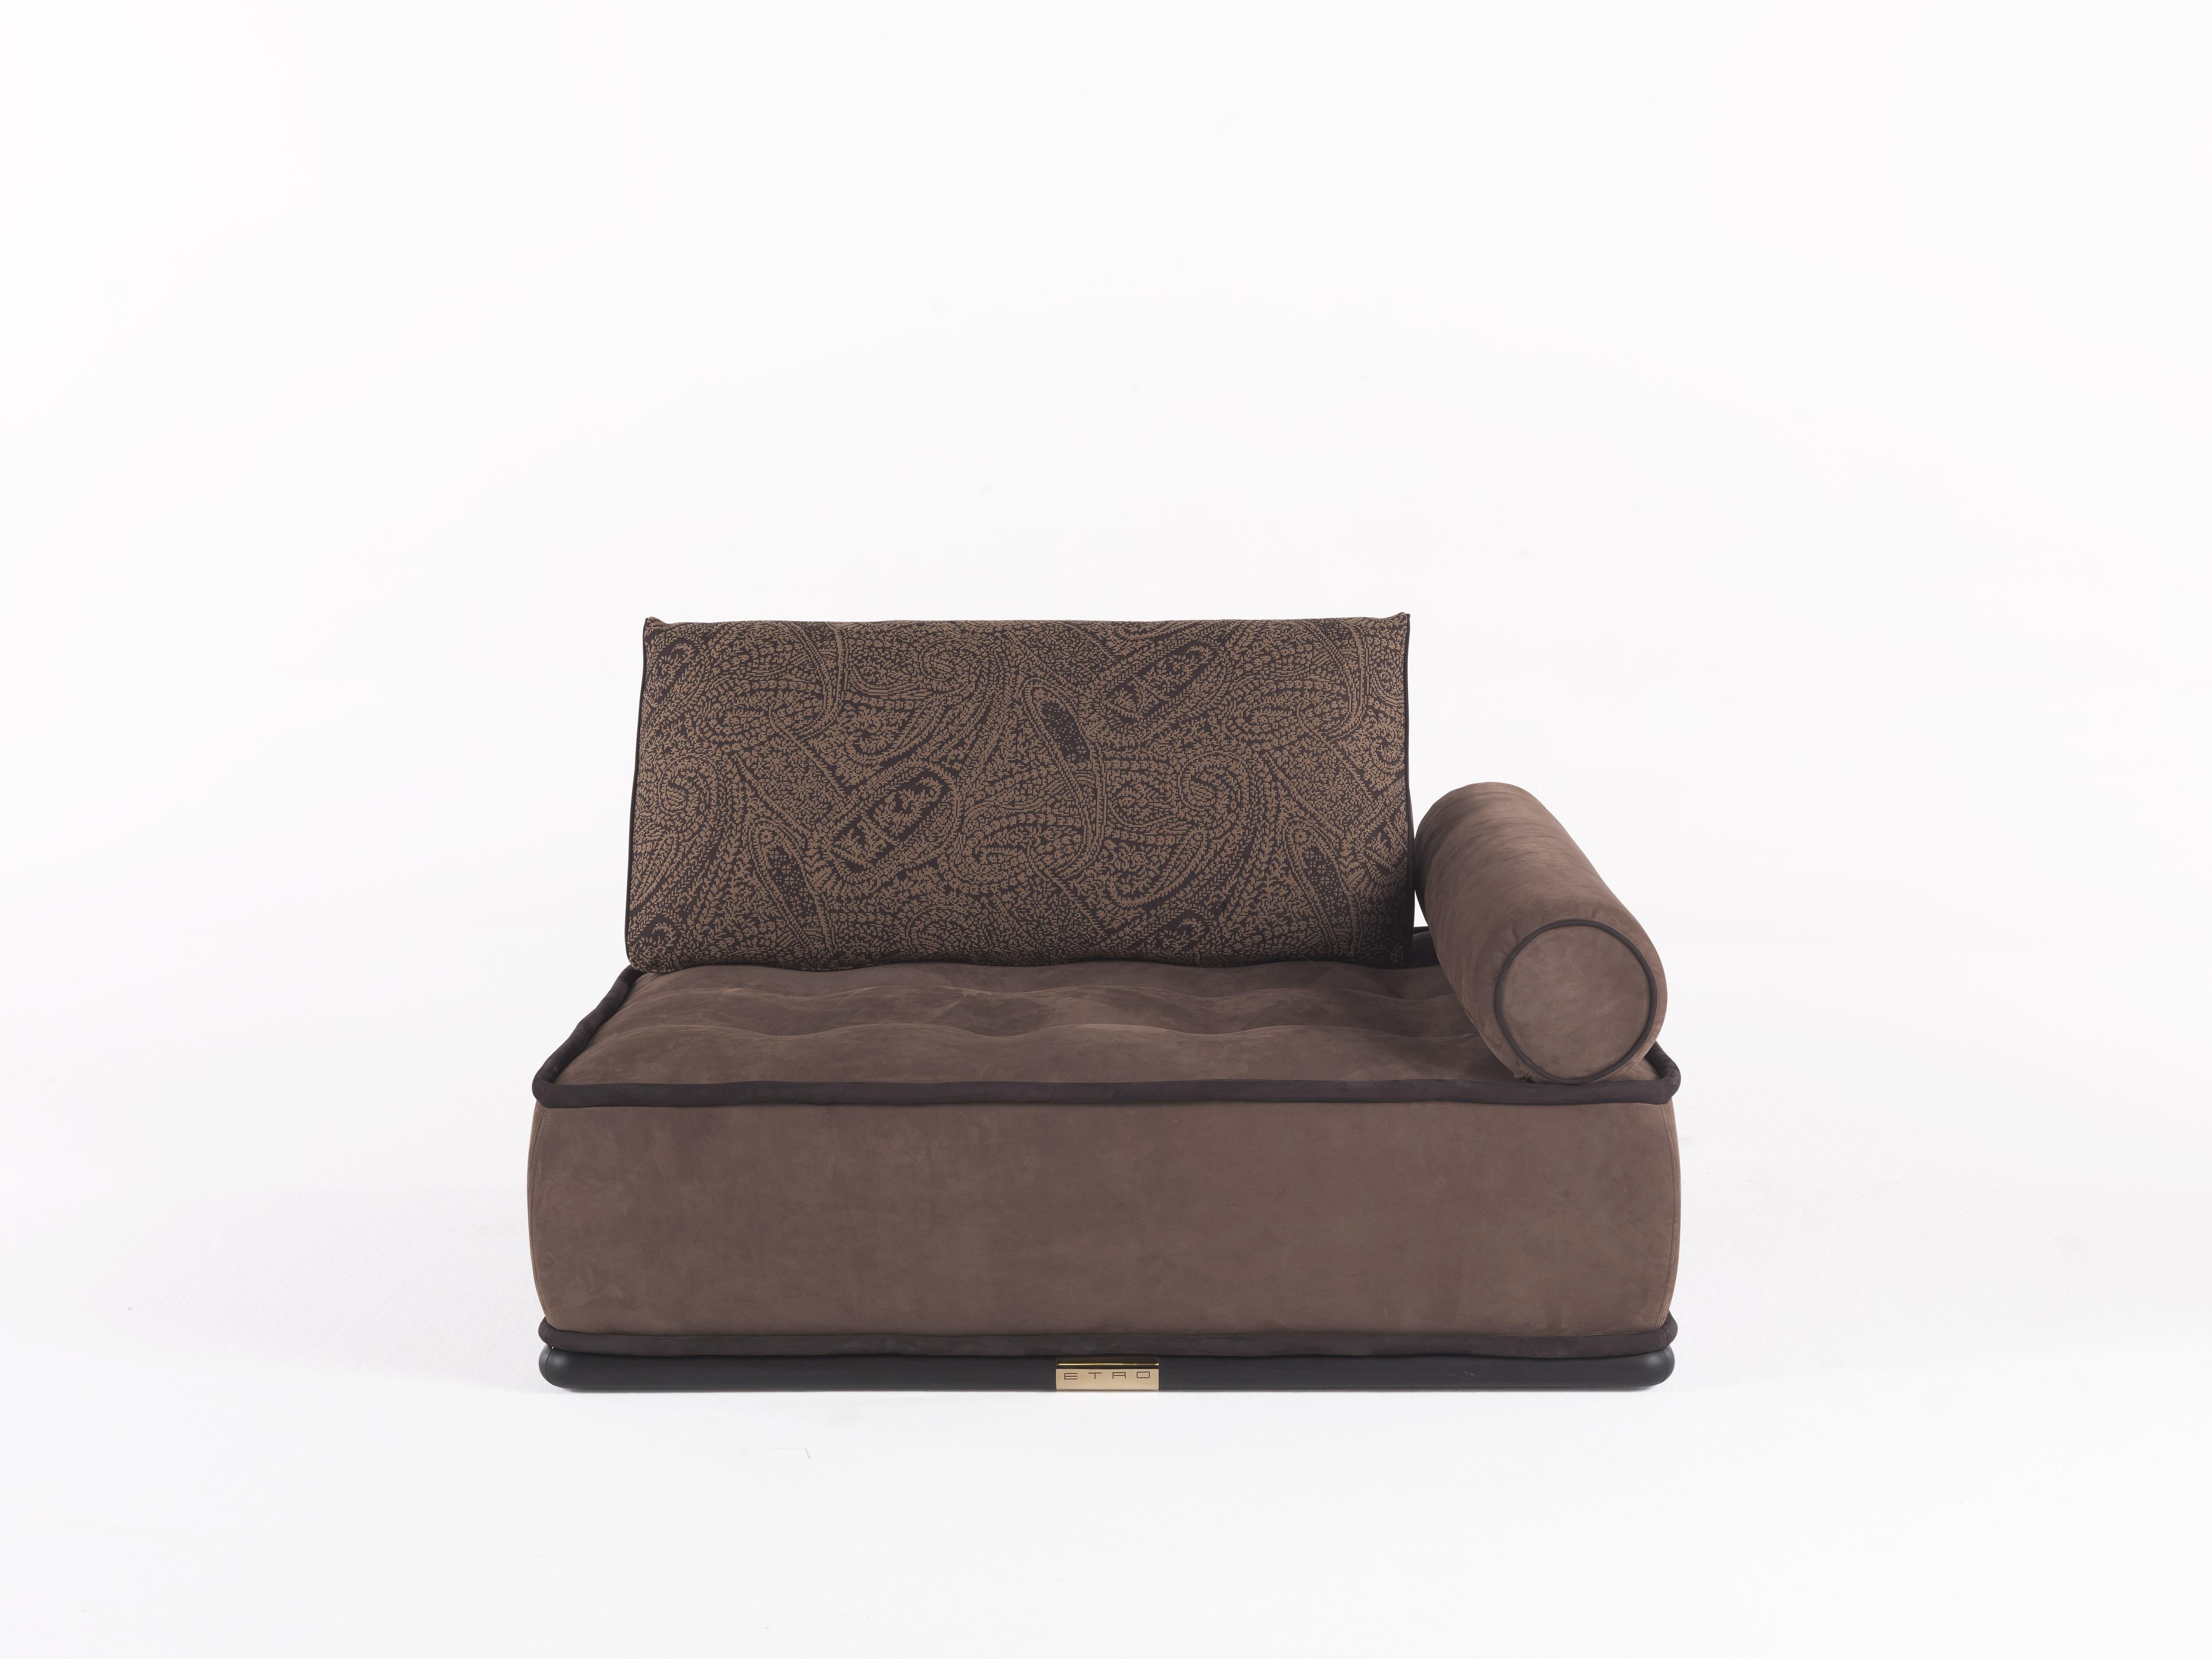 Italian 21st Century Woodstock.2 Modular Sofa in Leather by Etro Home Interiors For Sale